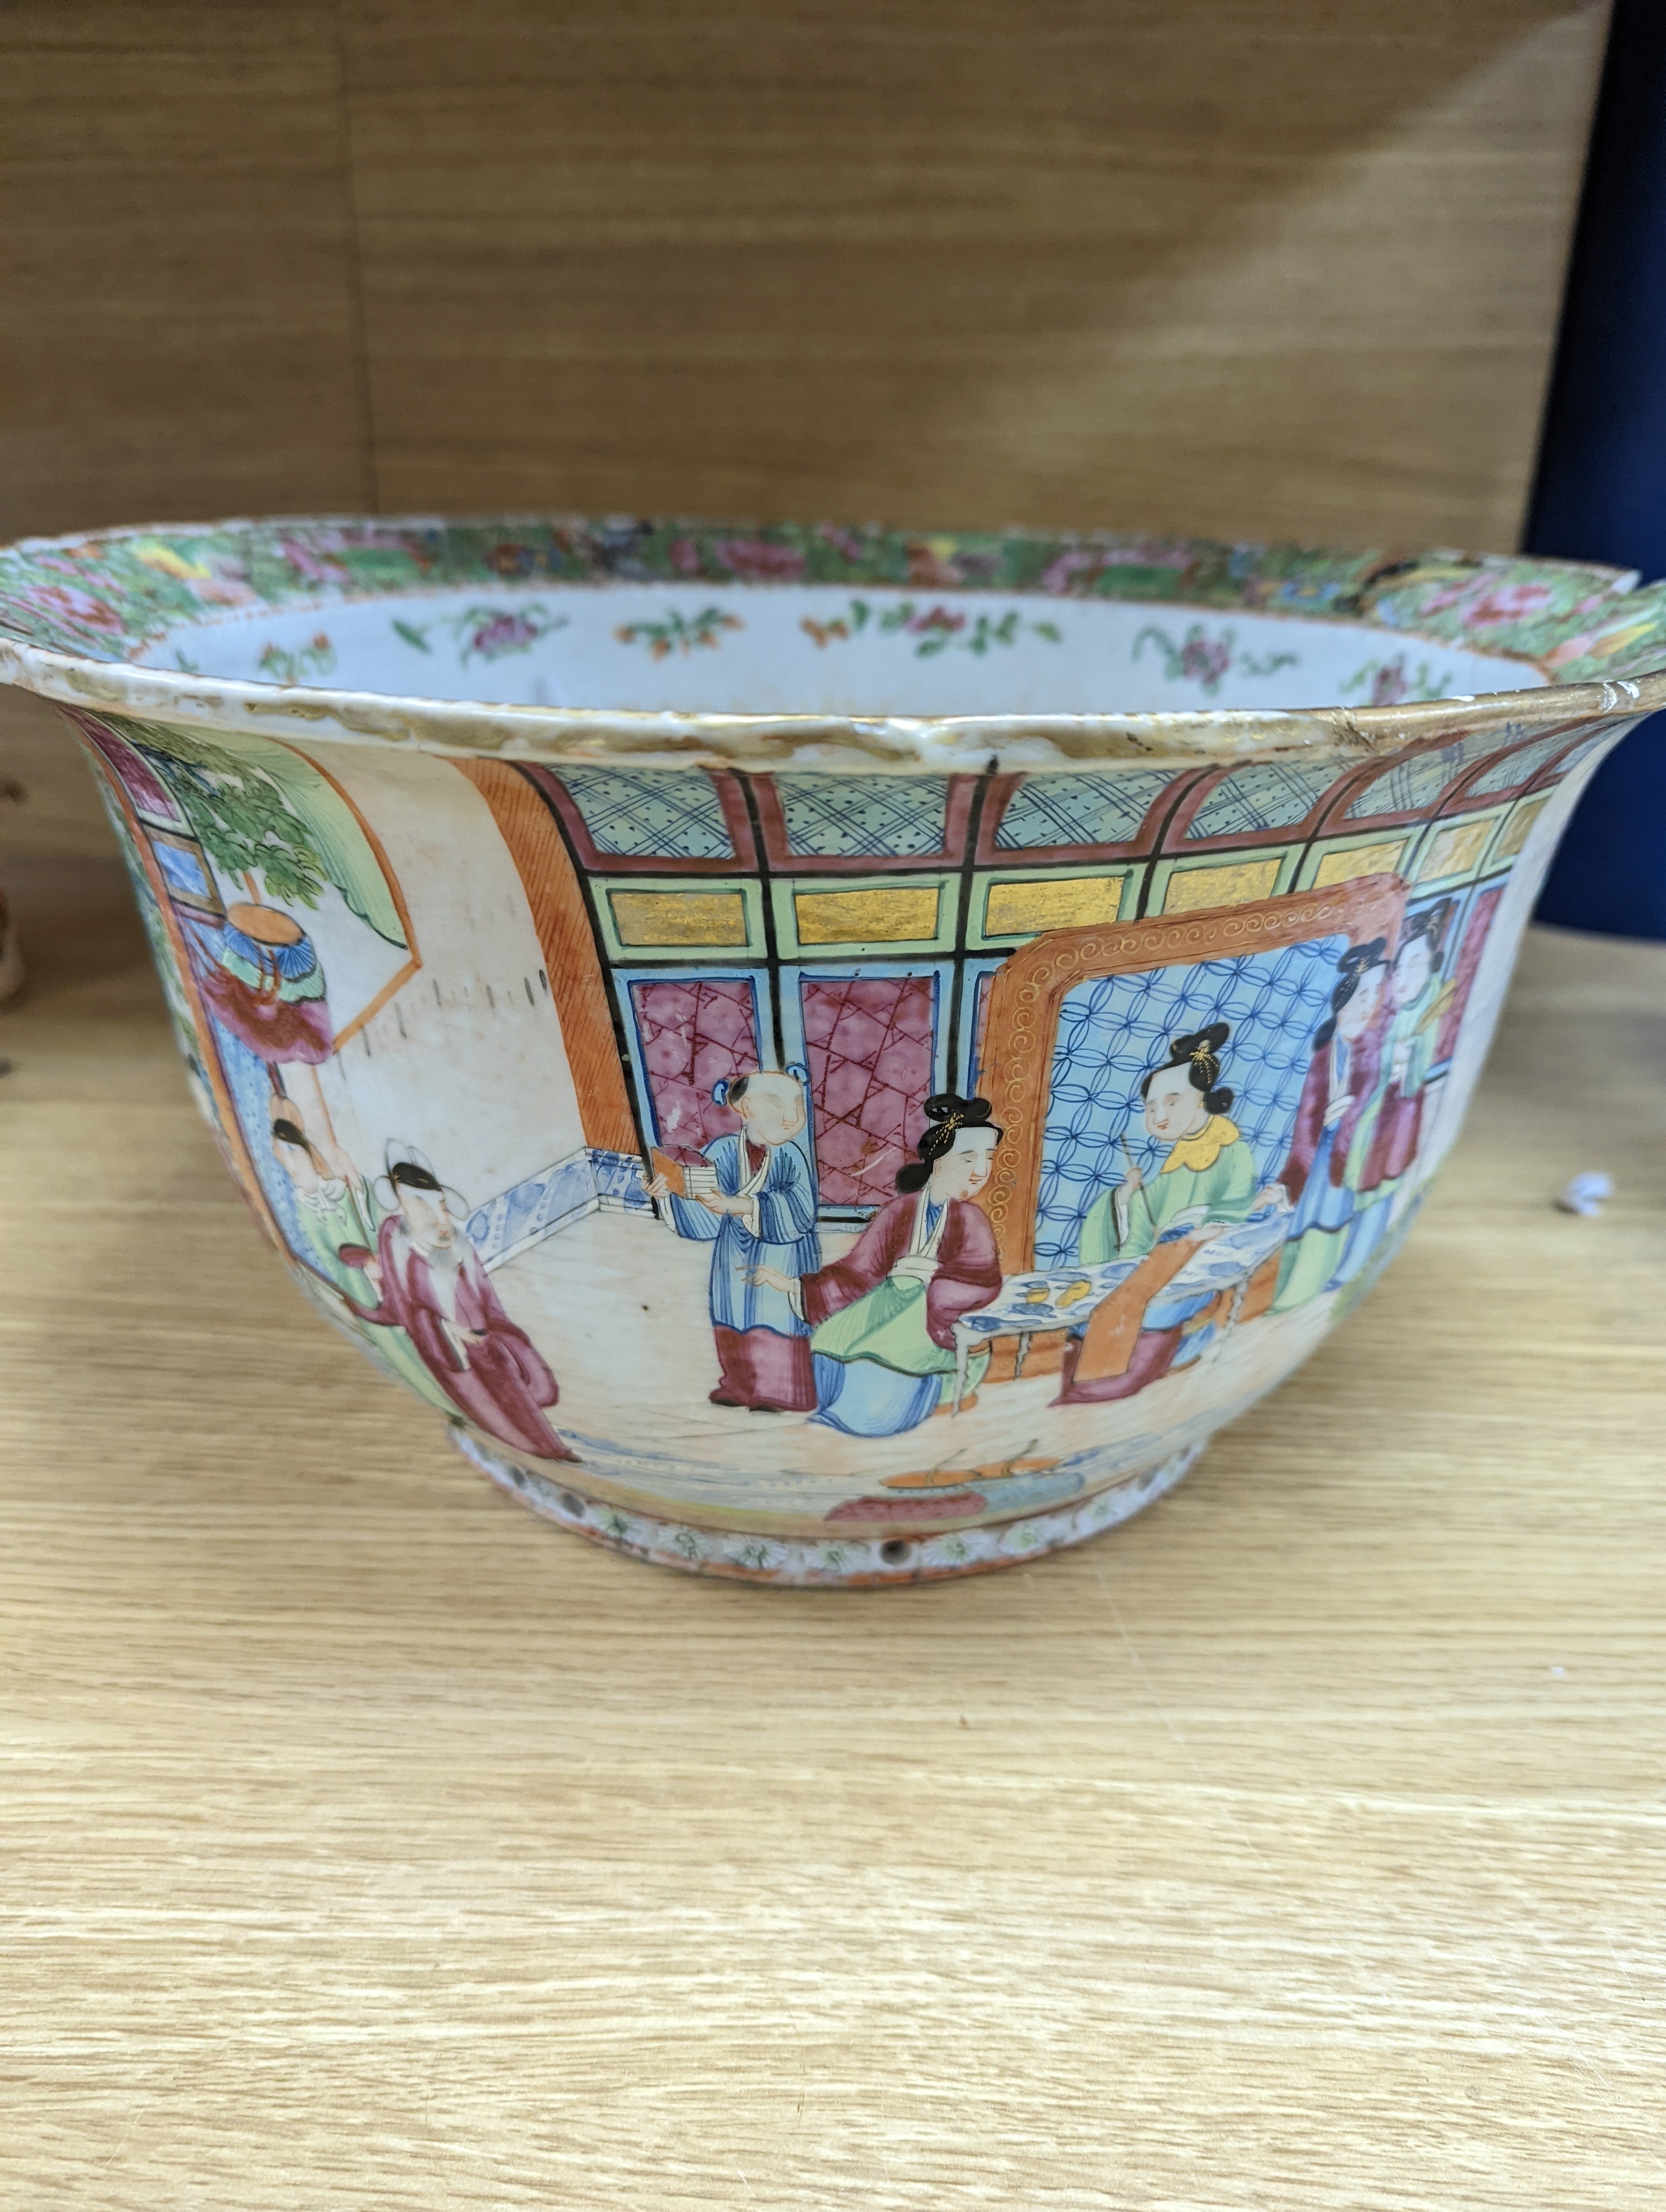 A Large Chinese famille rose flower pot, mid 19th century, 38cm